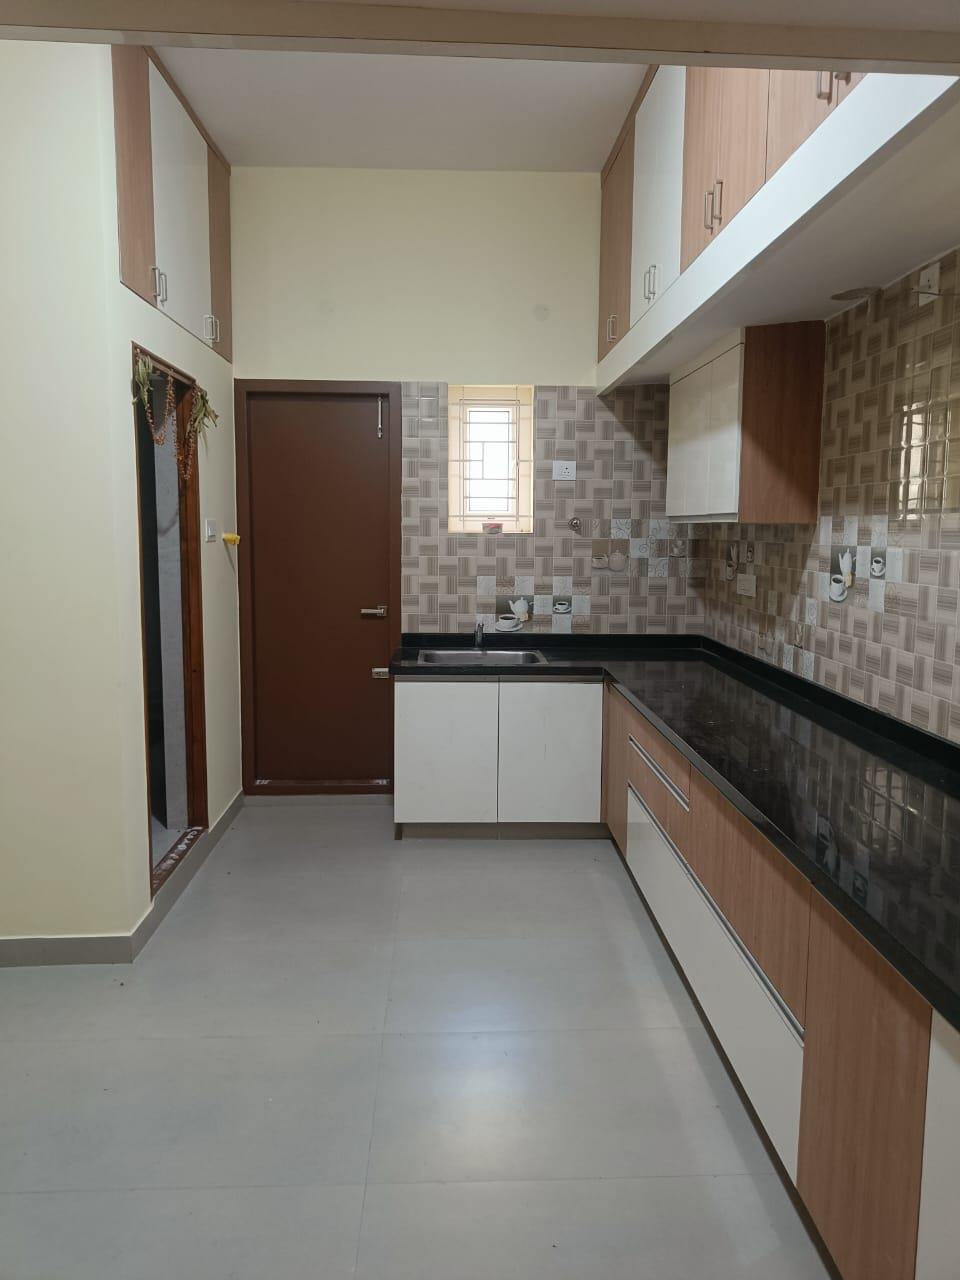 1 BHK Independent House for Lease Only at JAM-5673 in JP Nagar Layouts